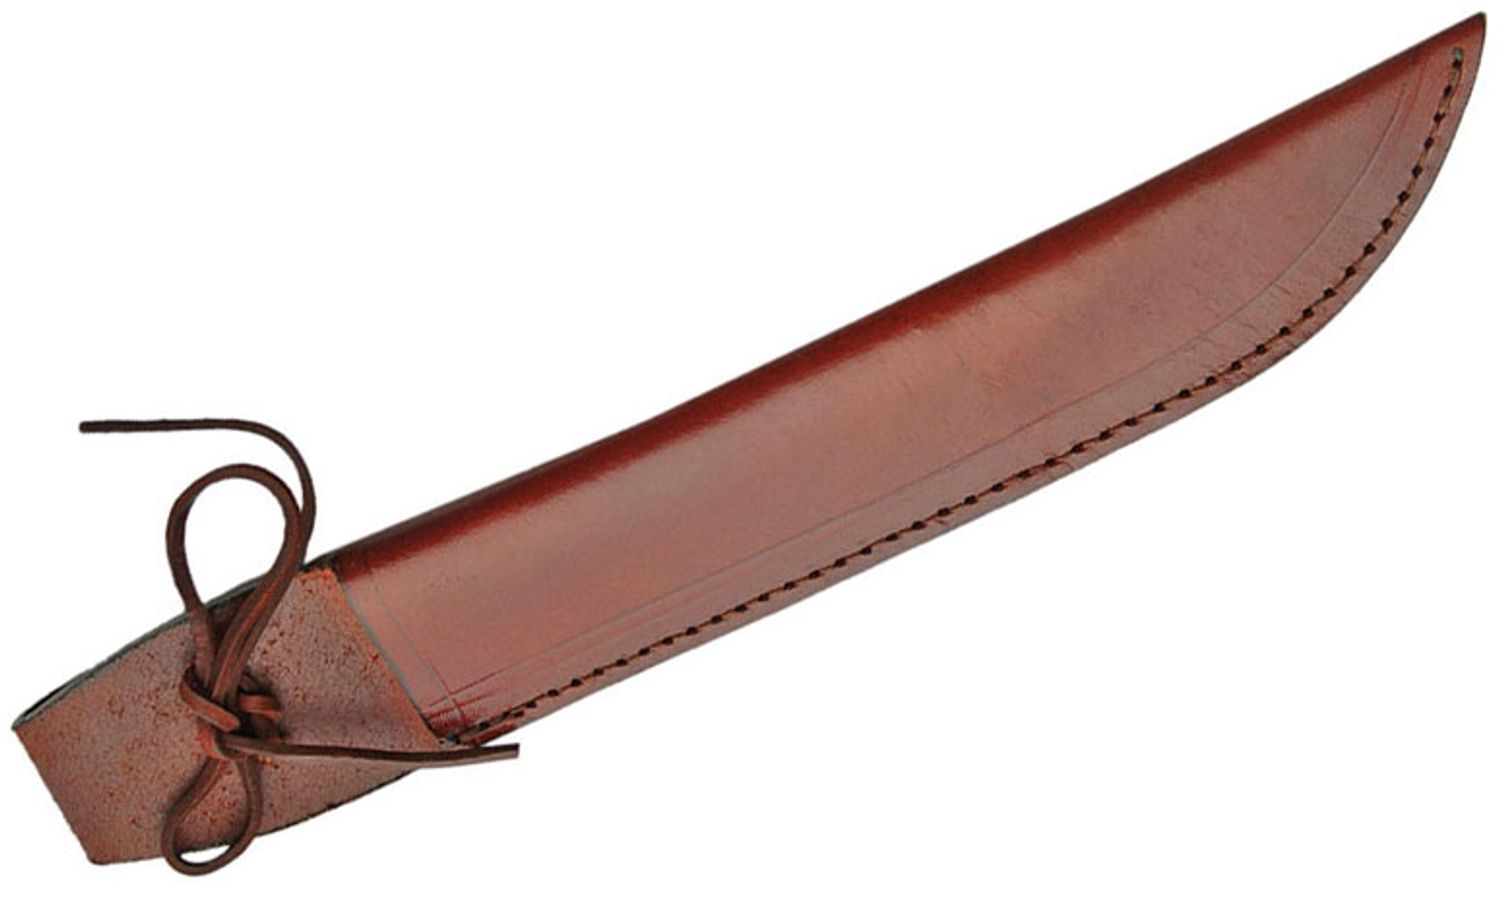 Brown Leather Sheath, Fits Most Fixed Blades Up to 10 - KnifeCenter -  SH1160